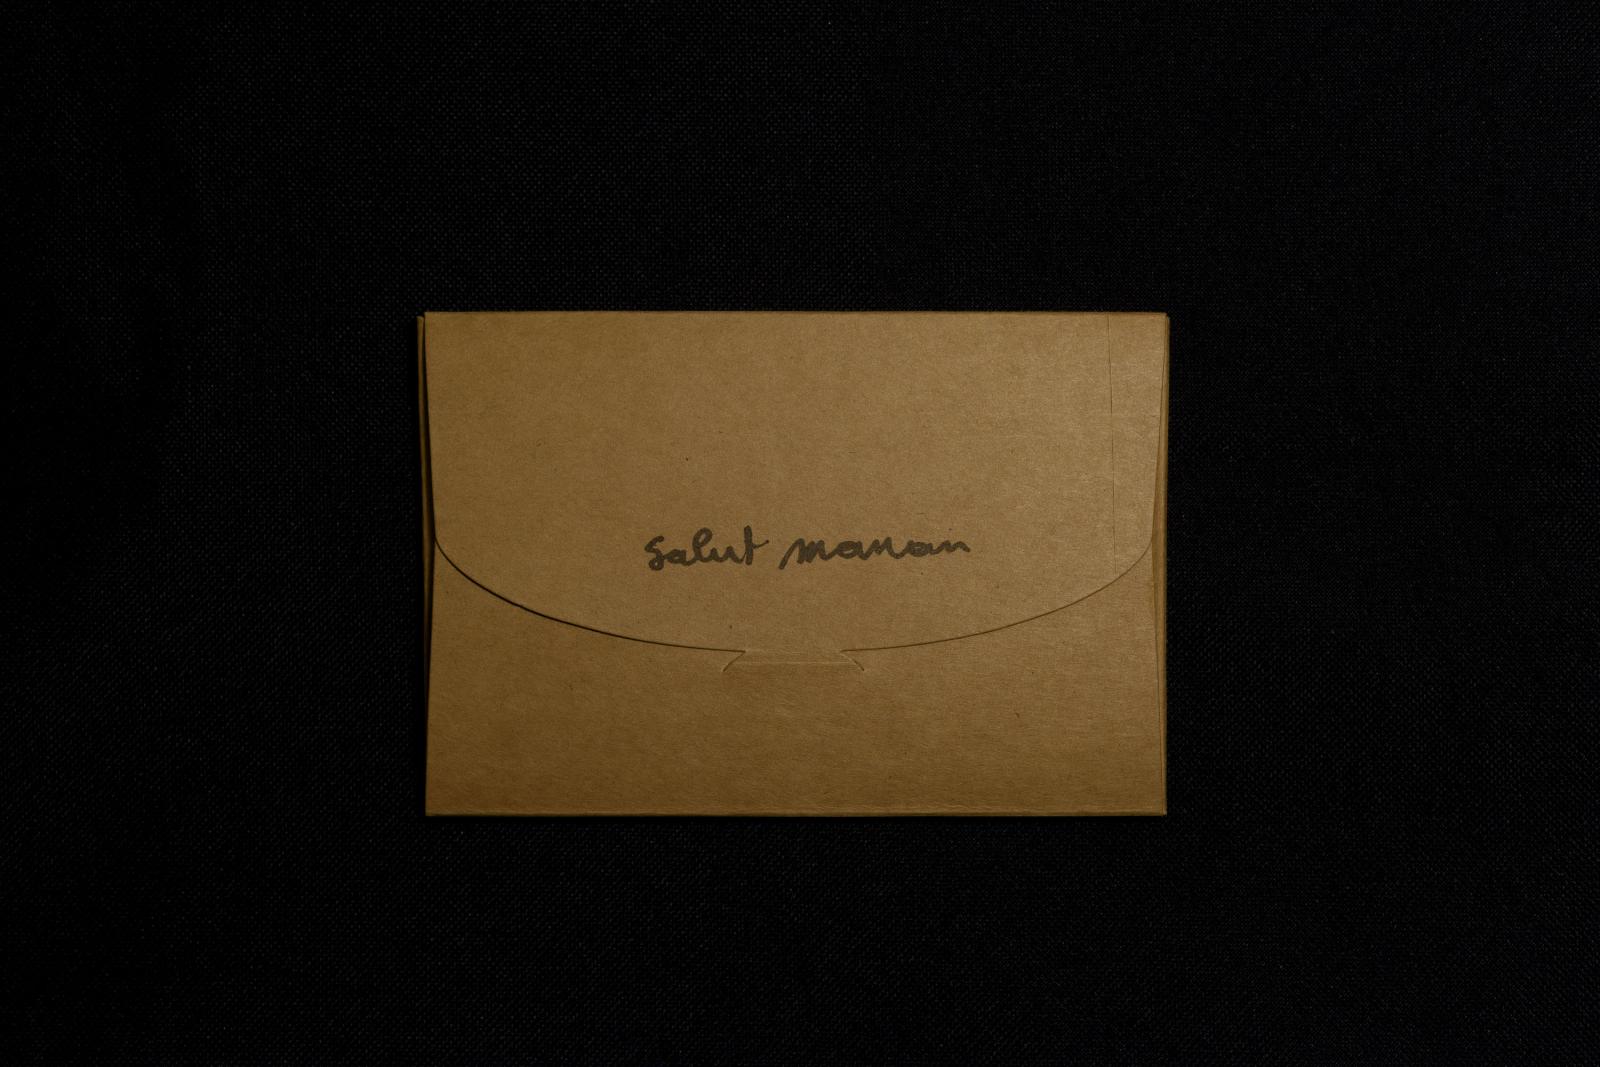 Image from SALUT MAMAN